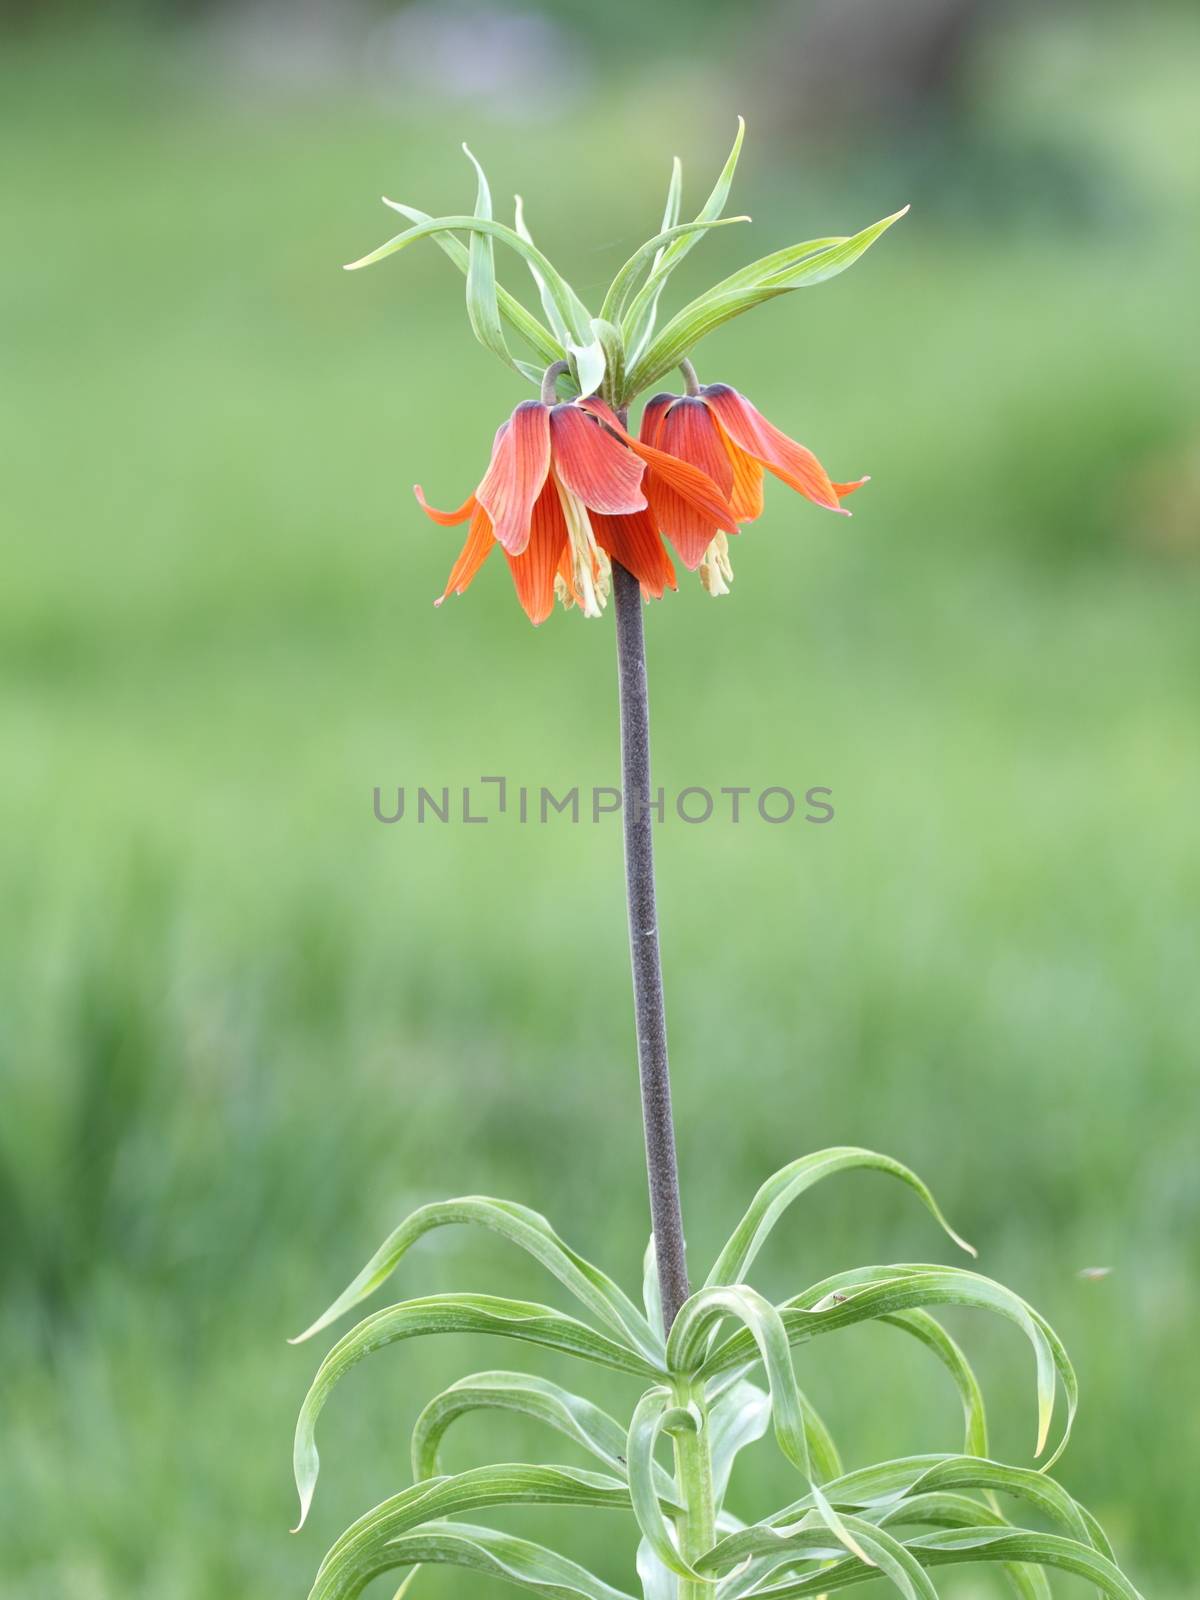 fritillaria  imperialis in Turkey mountains with green backgroun by mturhanlar